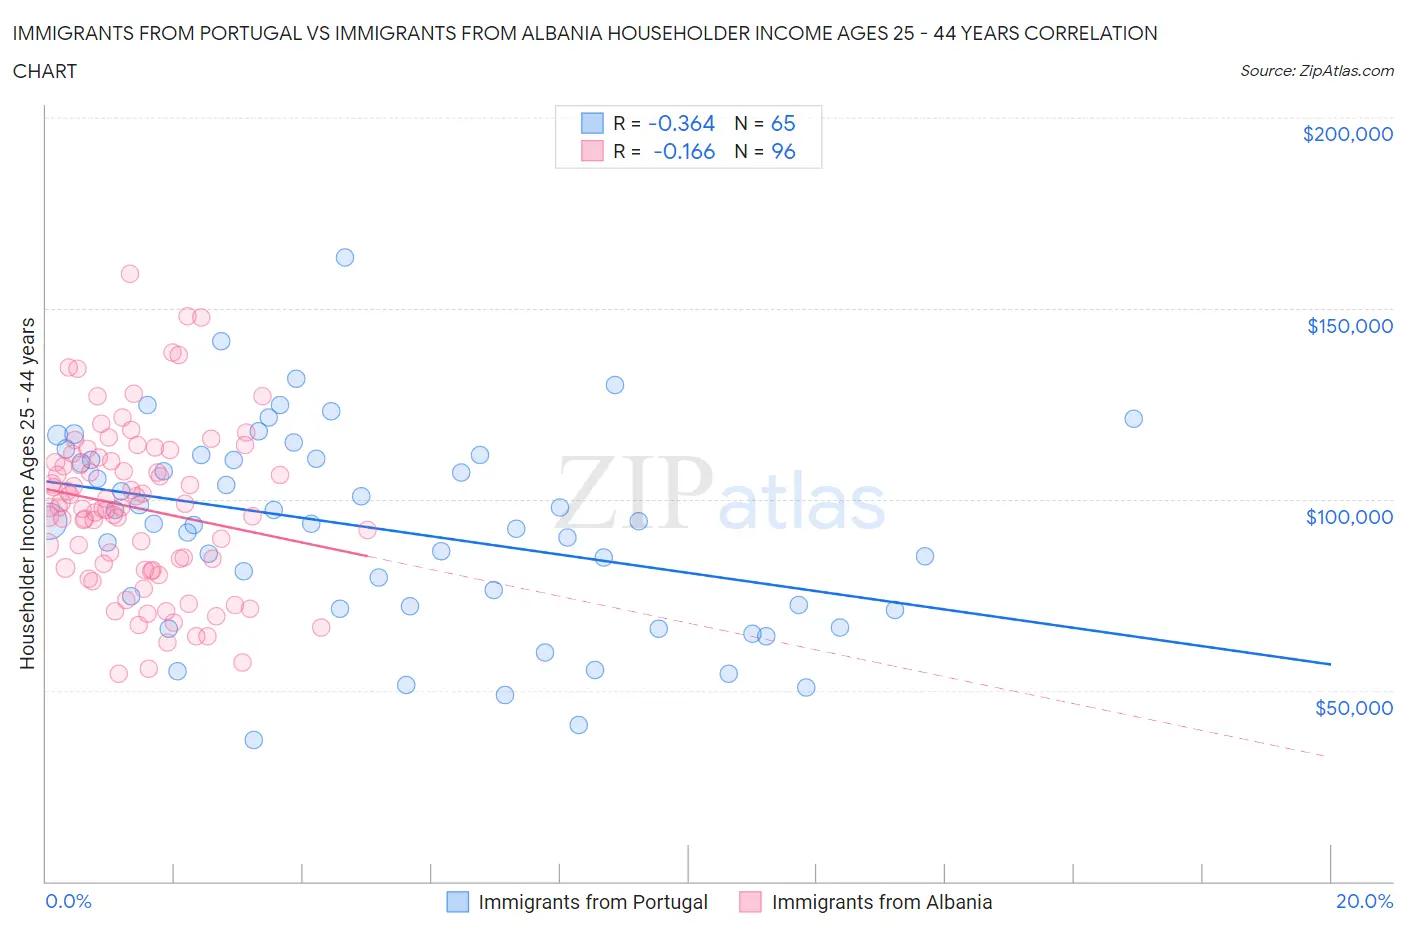 Immigrants from Portugal vs Immigrants from Albania Householder Income Ages 25 - 44 years